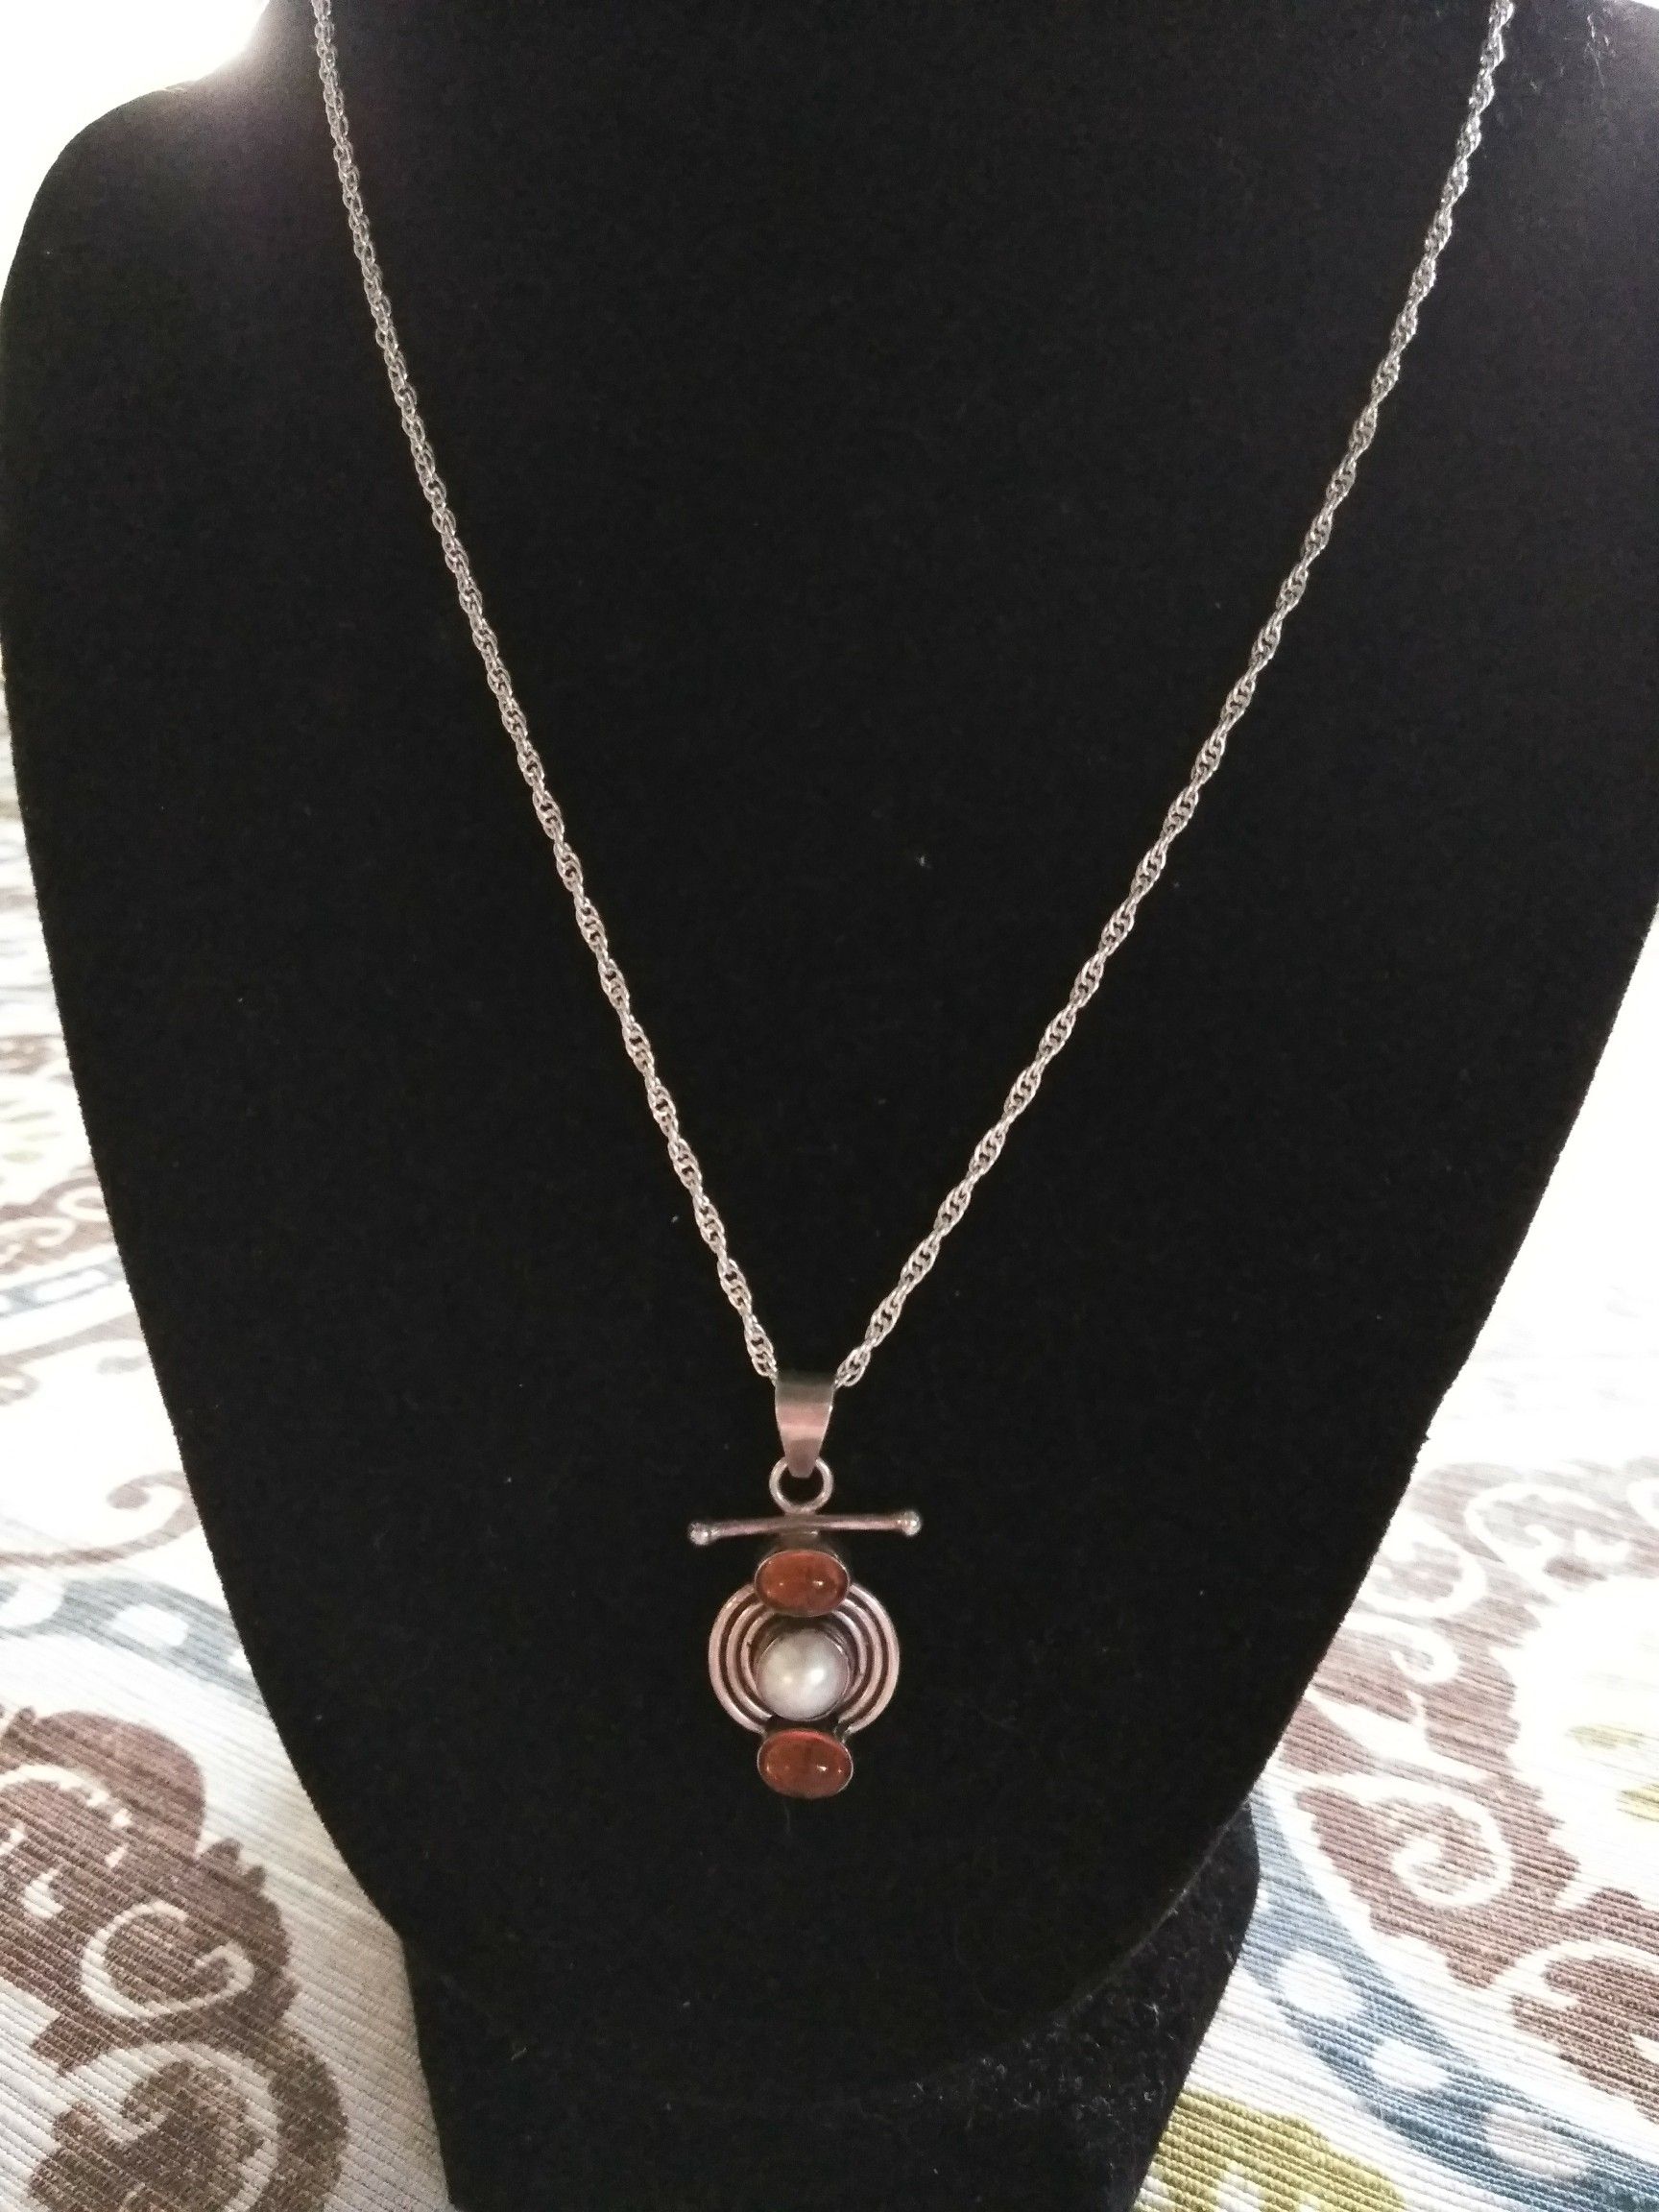 Silver Necklace and Pendant